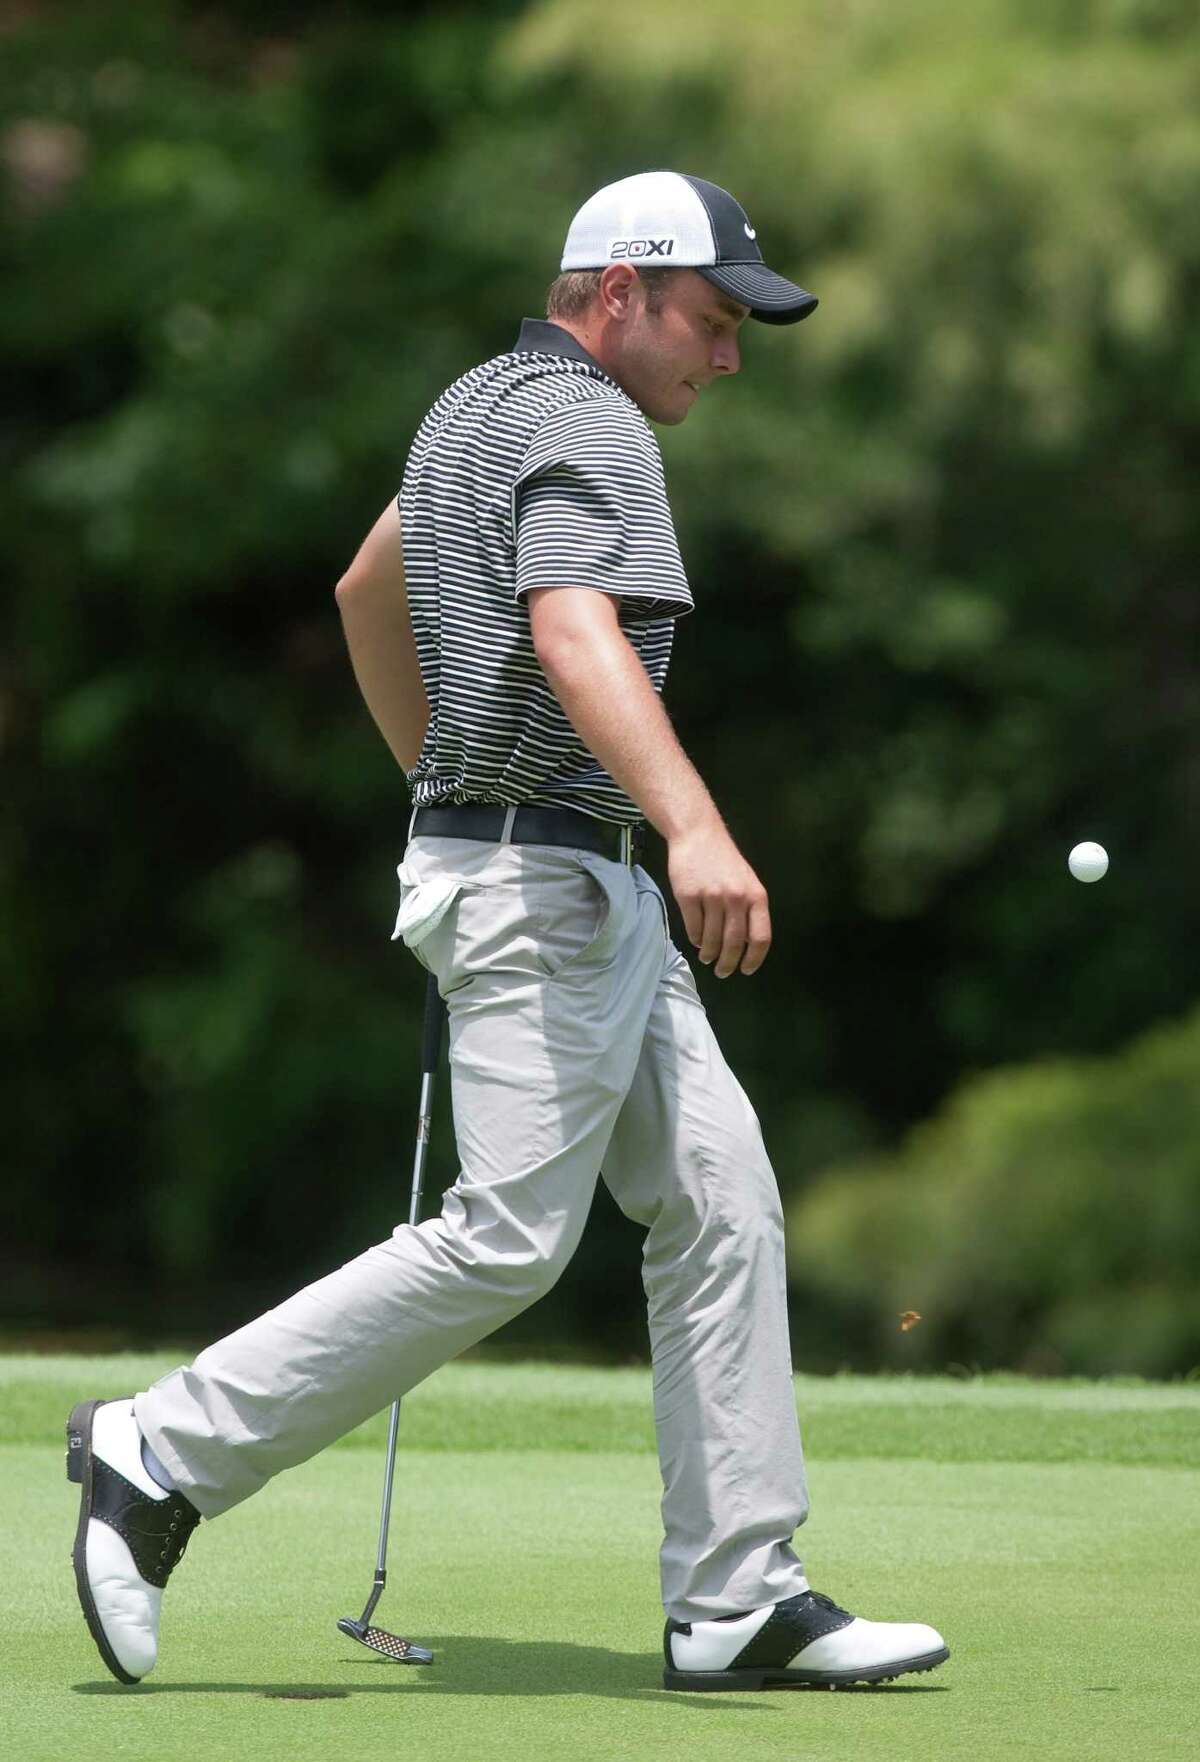 Austin Quick kicks his ball after missing a birdie putt and settling for par on hole eighteen during the U.S. Open sectional qualifying tournament at Lakeside County Club on Monday, June 4, 2012 in Houston, Texas.